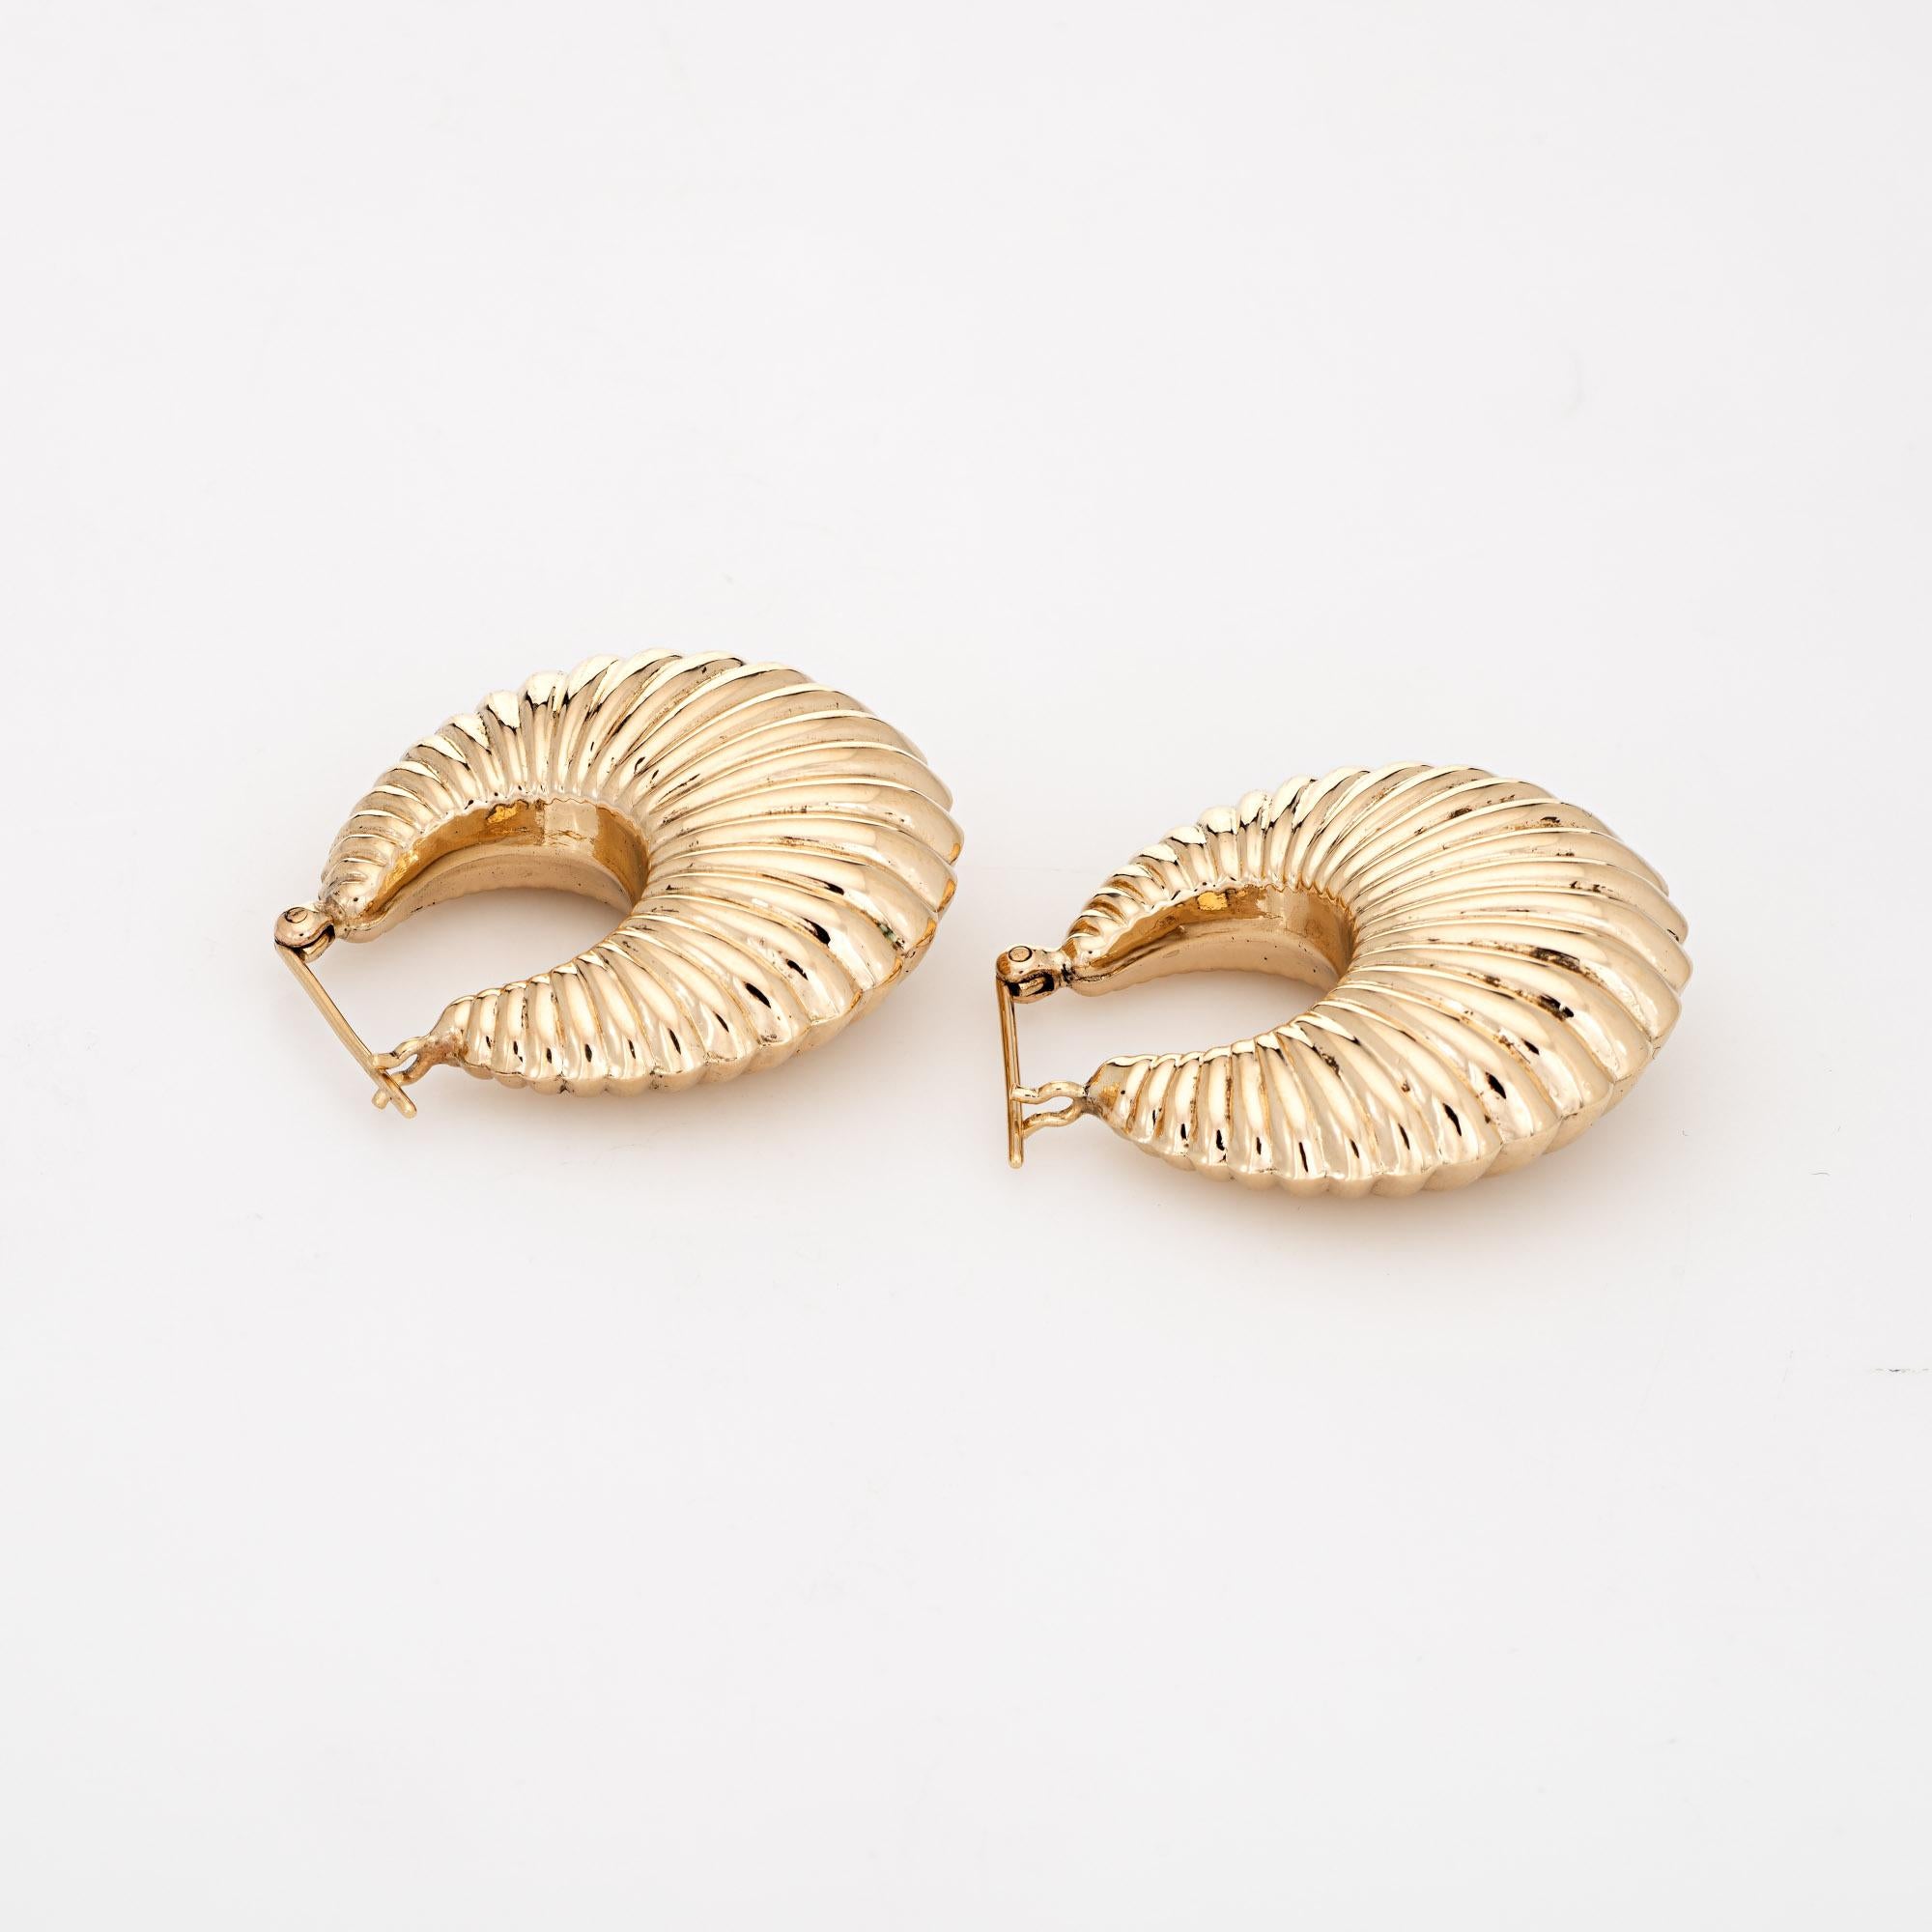 Elegant pair of vintage hoop earrings (circa 1980s to 1990s) crafted in 14k yellow gold. 

The charming earrings are crafted in a puffed shell design. The earrings are hollow and sit comfortably on the earlobe. Ideal for day or evening wear. The